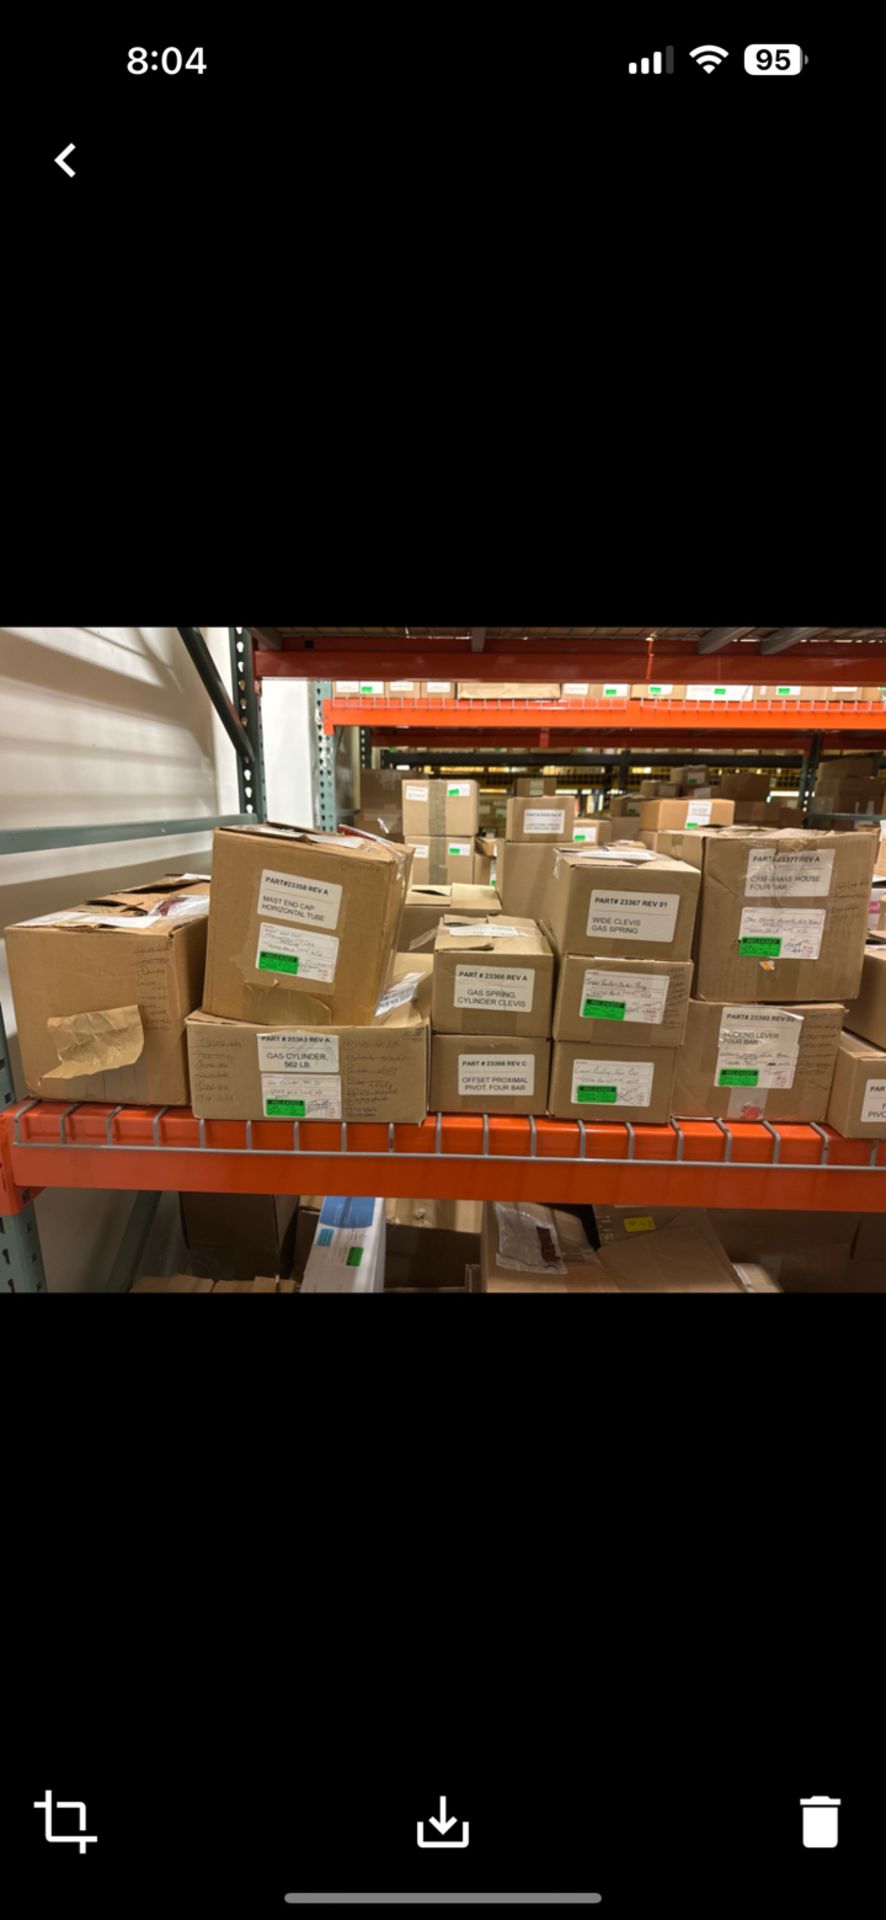 Contents of Pallet Racking & Shelves - Image 132 of 132